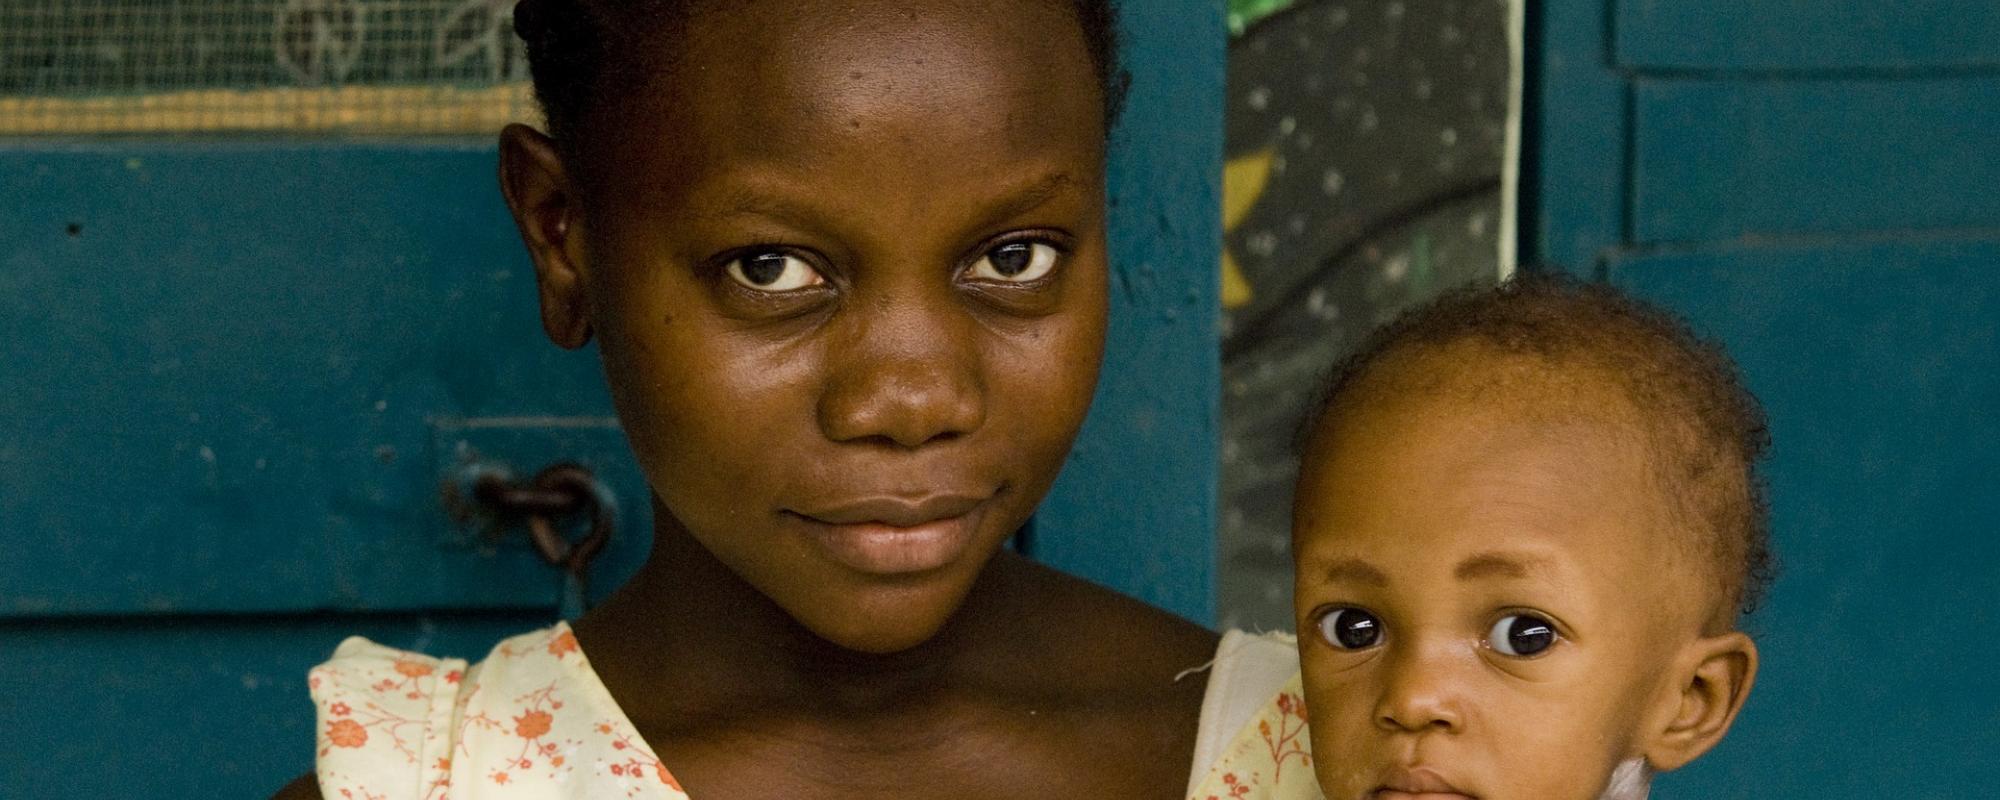 Haitian mother and child